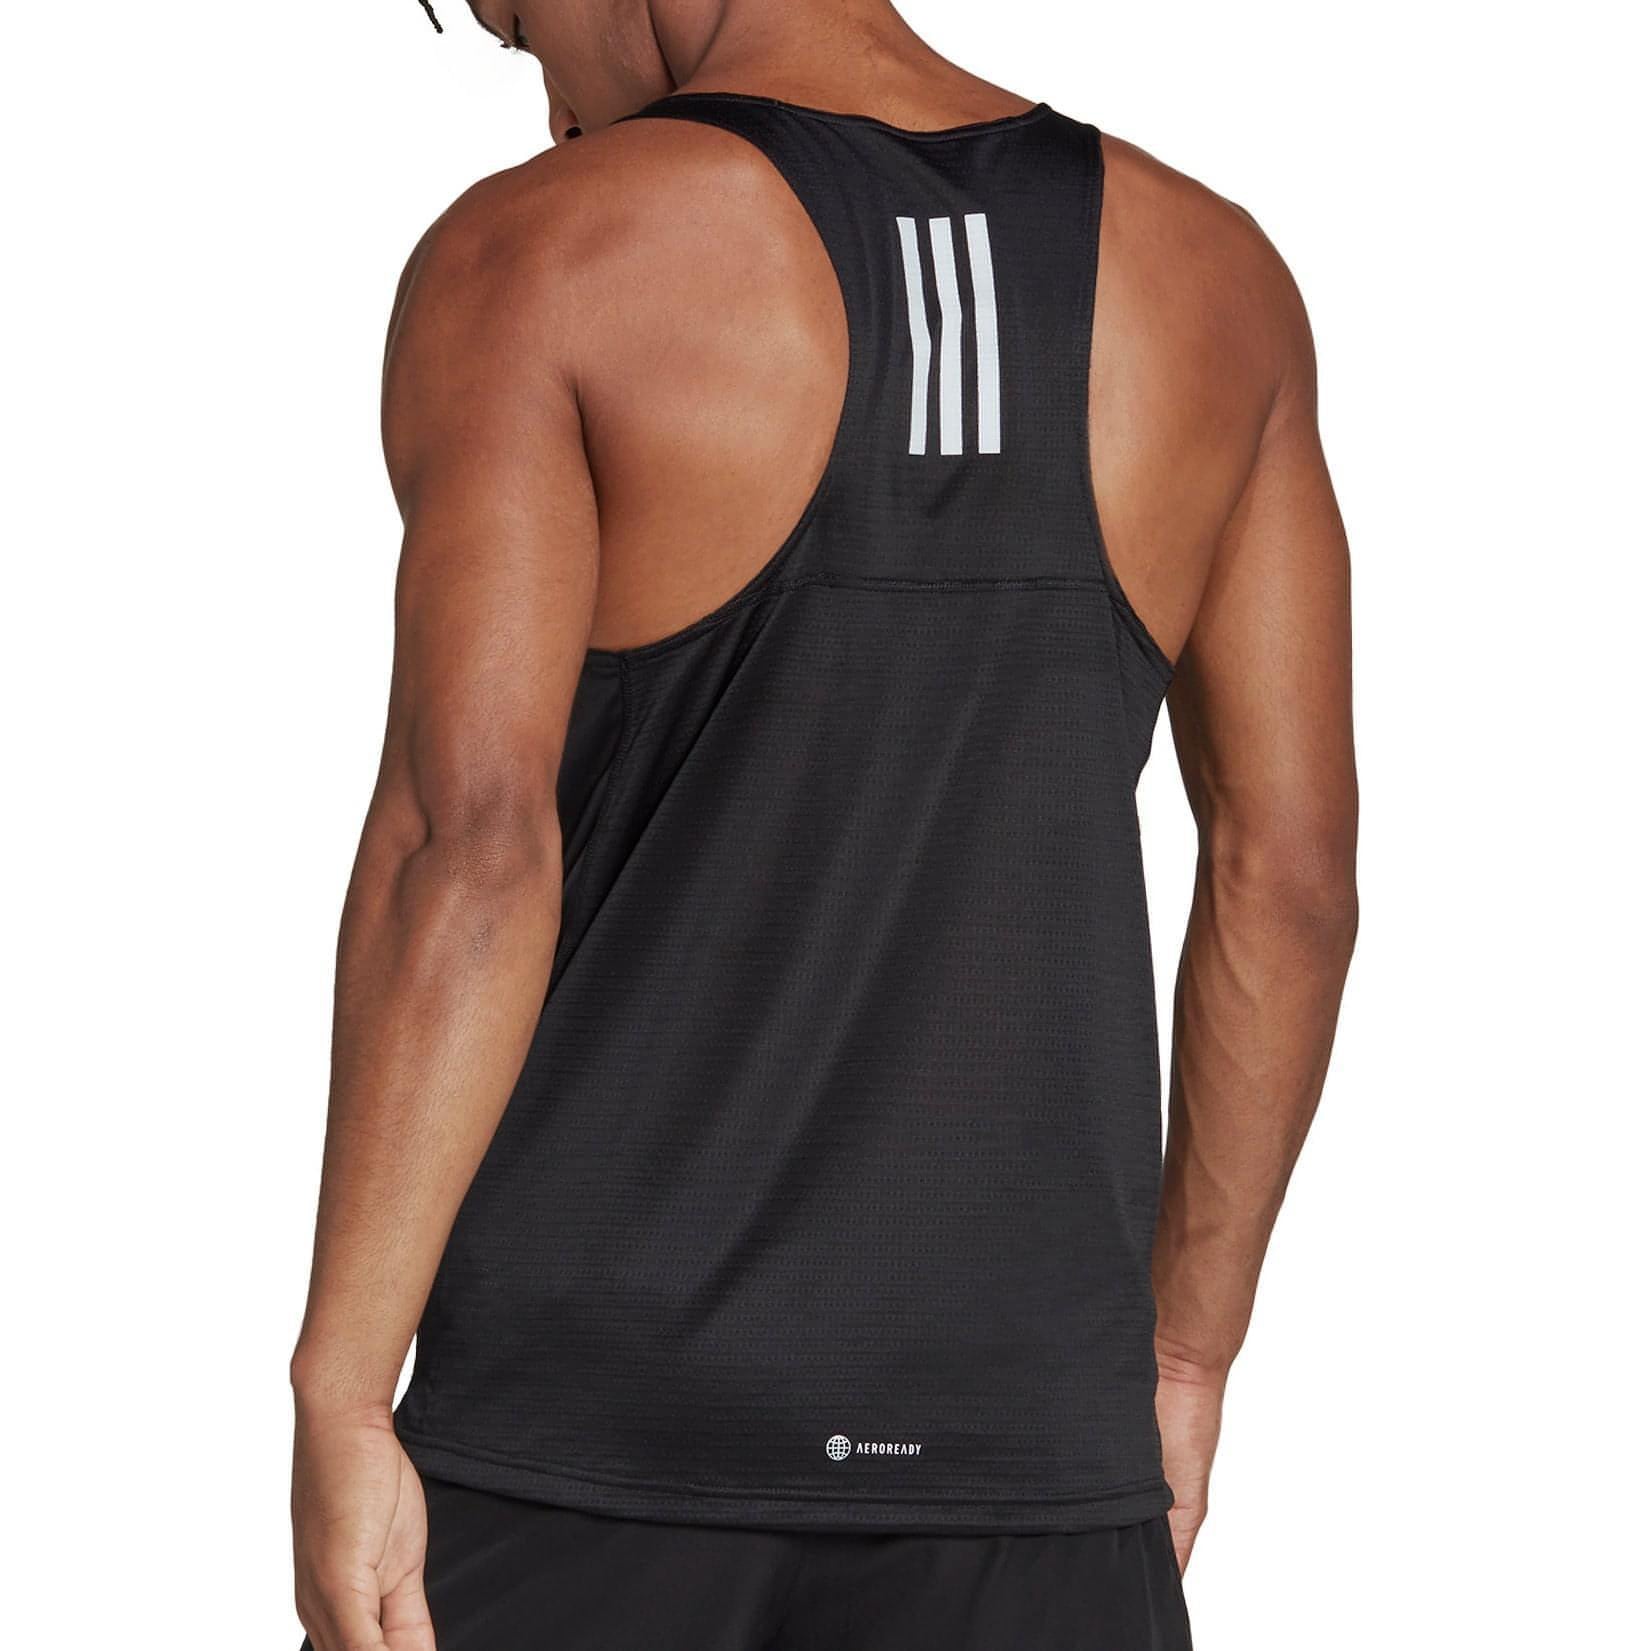 Adidas Own The Run Vest Hm8437 Back View